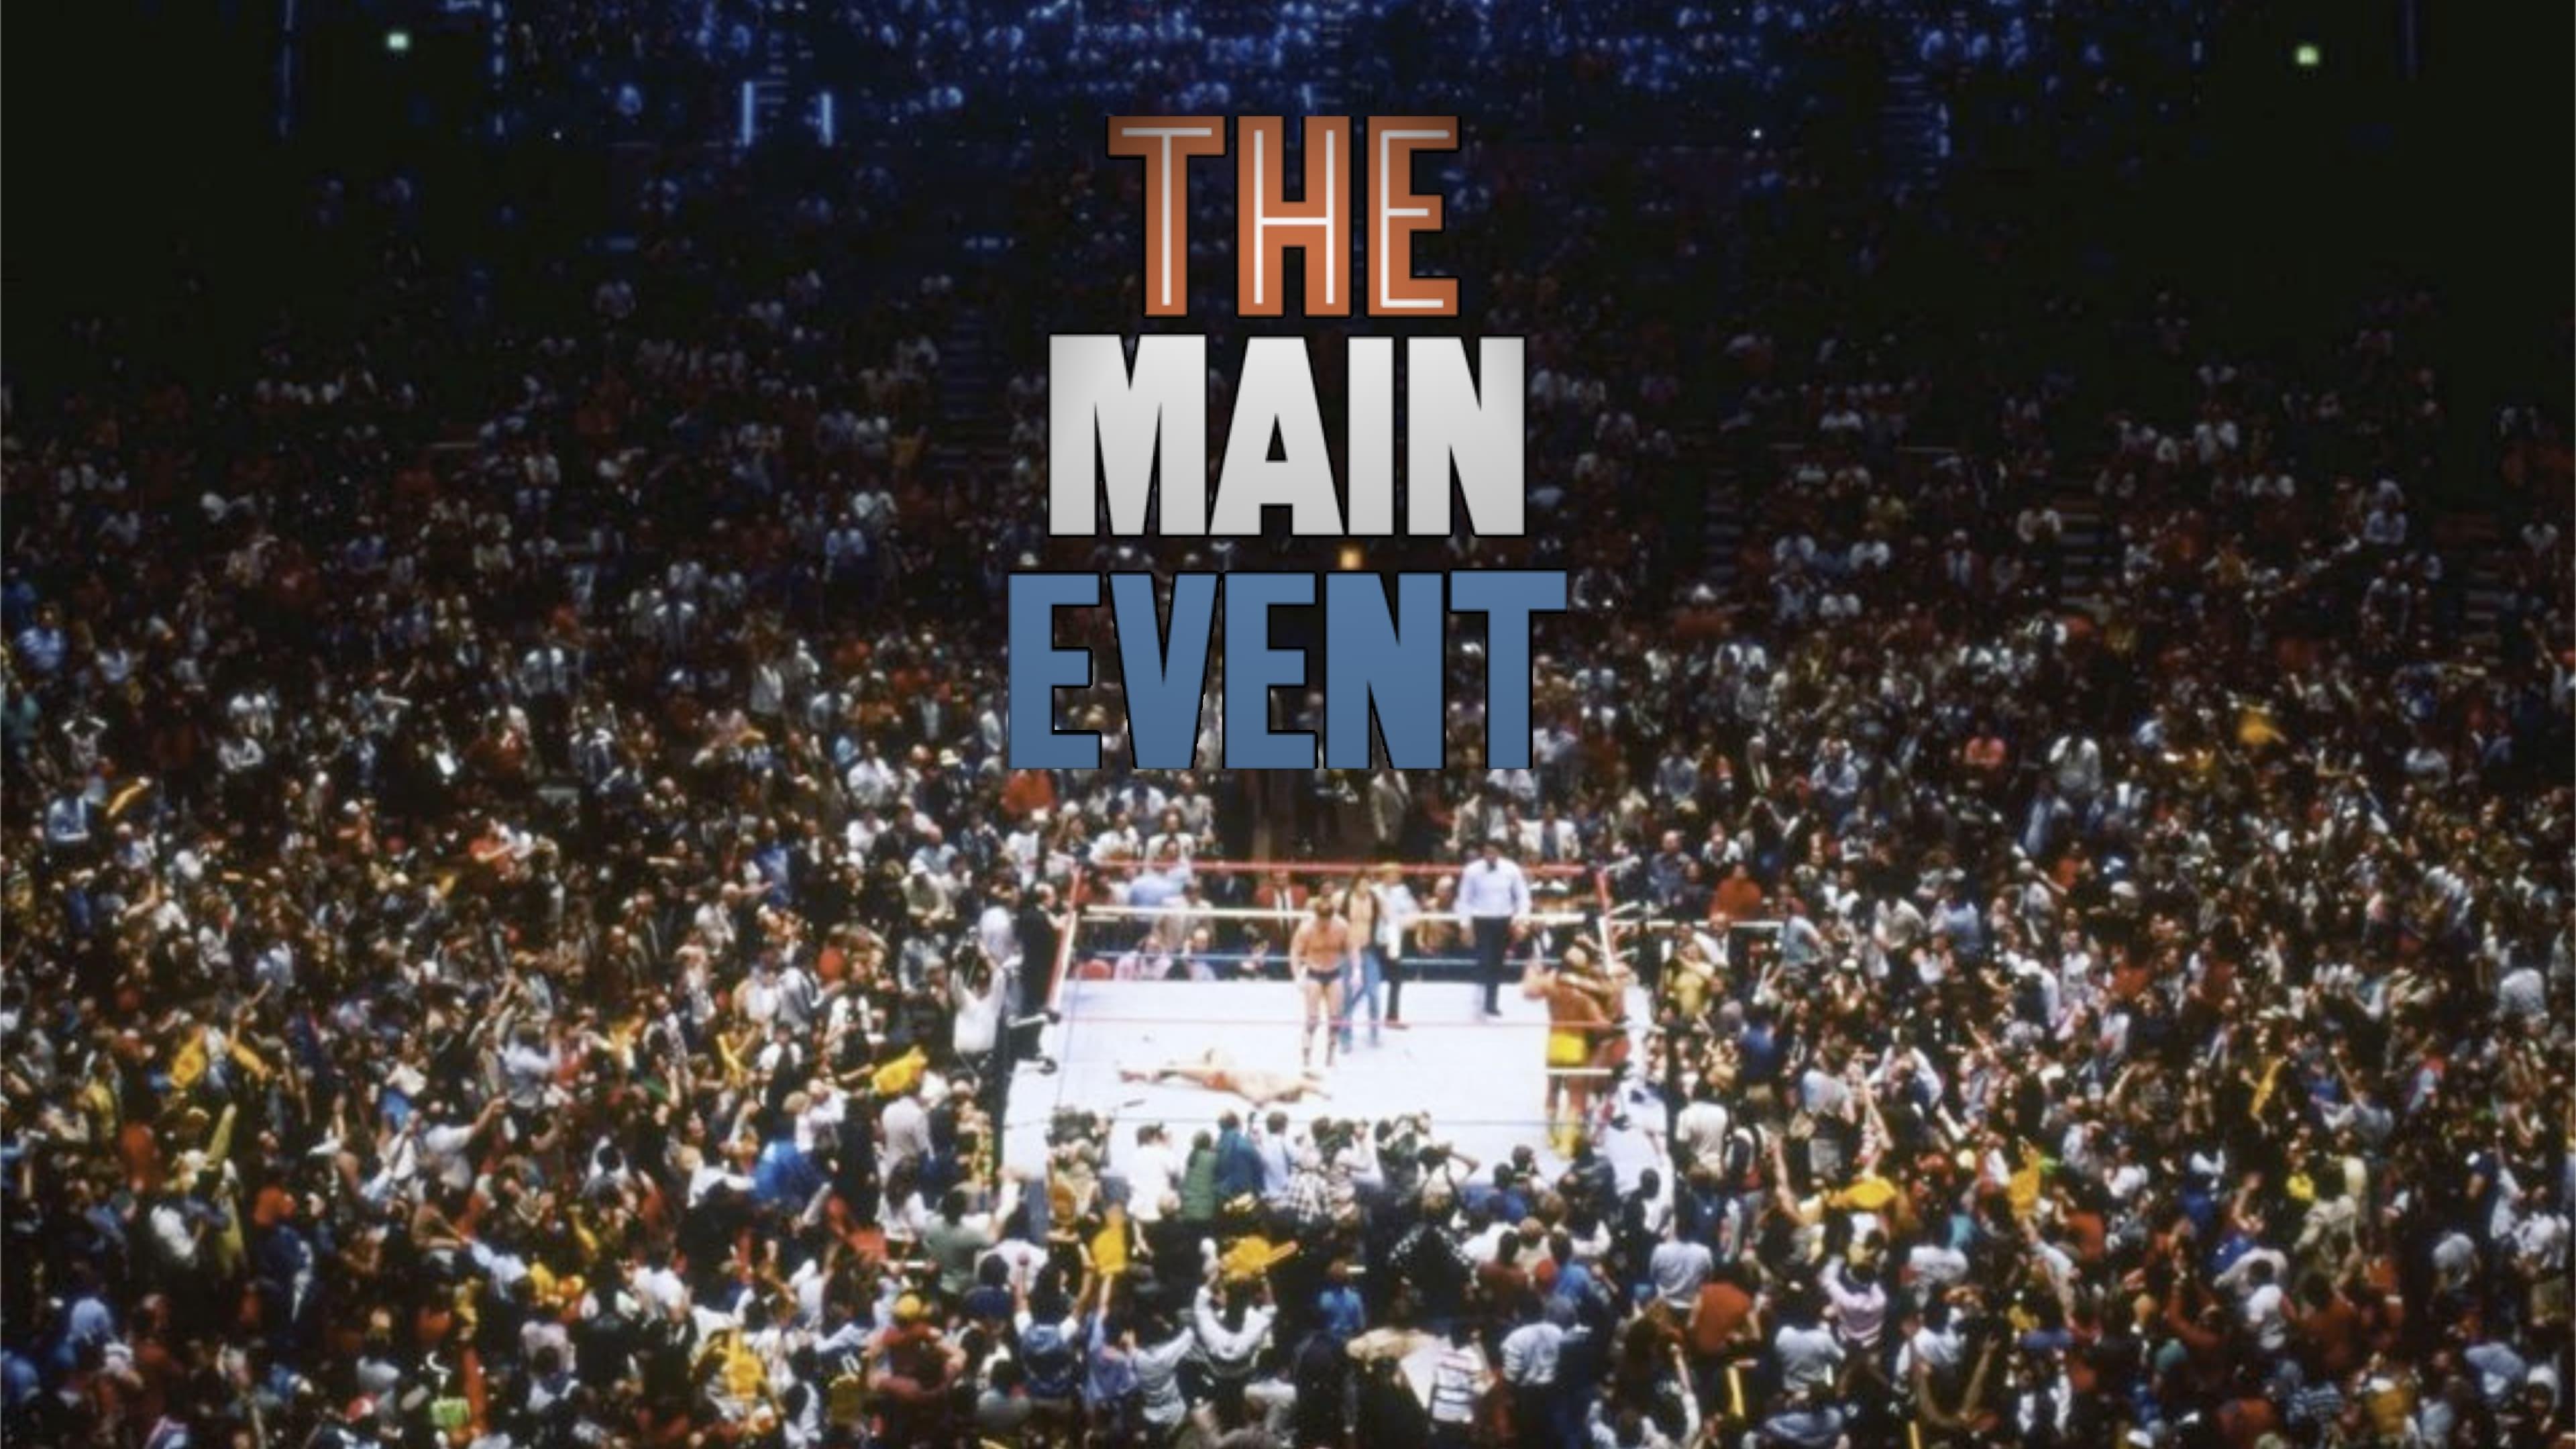 WWF The Main Event backdrop